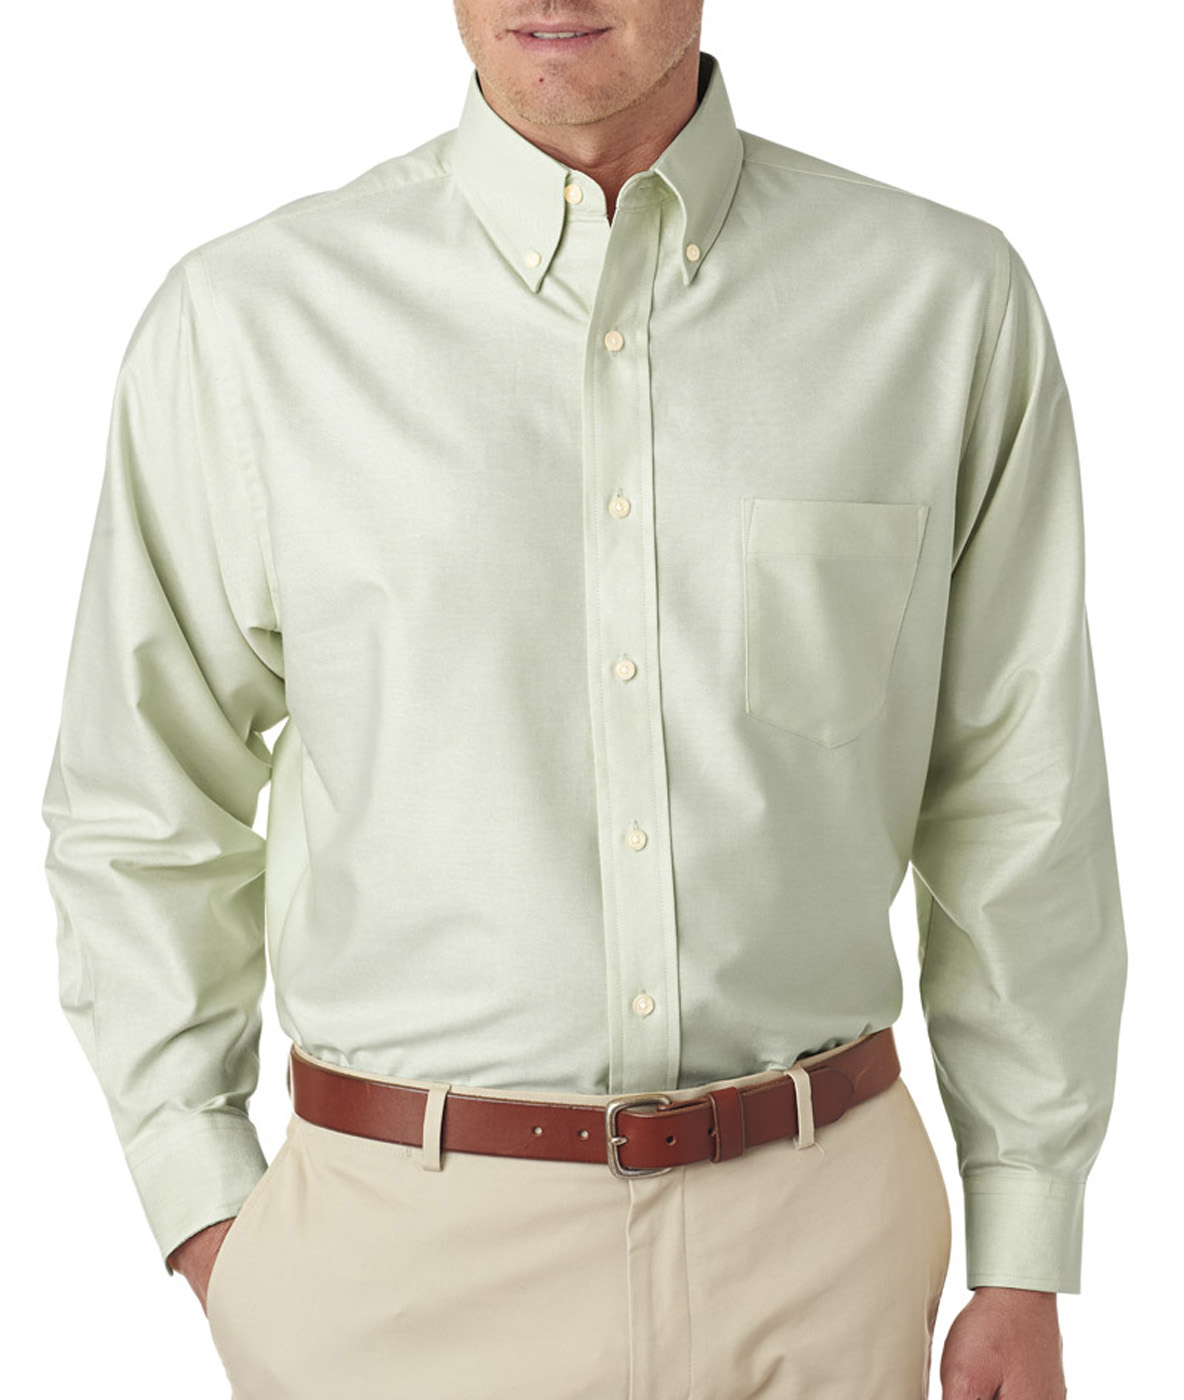 UltraClub 8970 Men's Classic Wrinkle-Resistant Long-Sleeve Oxford - image 1 of 3